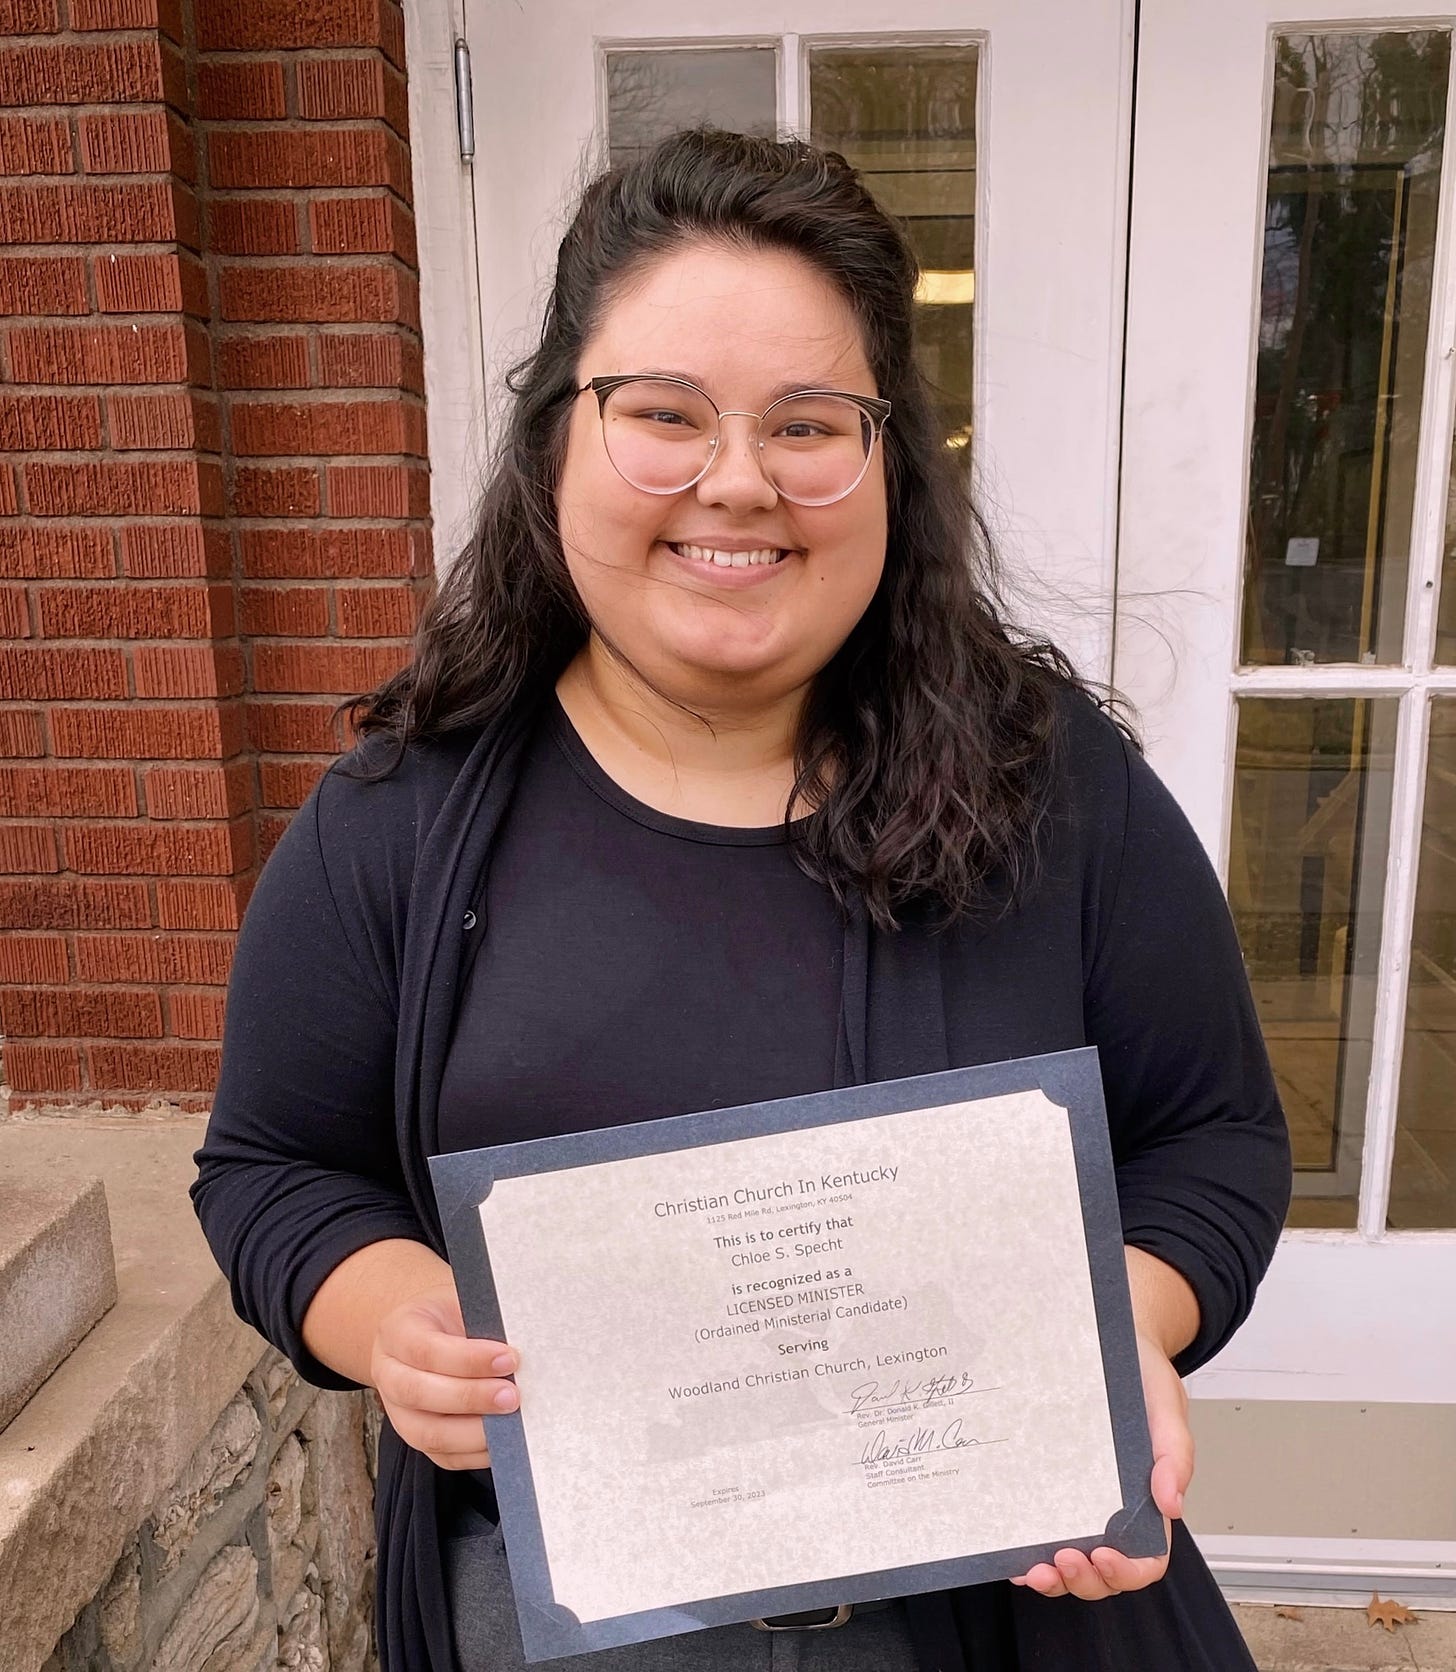 Chloe, a white femme person with brown hair and glasses, is pictured from the waist up. She is wearing all black clothes and holding her certificate of licensure as a pastor. 